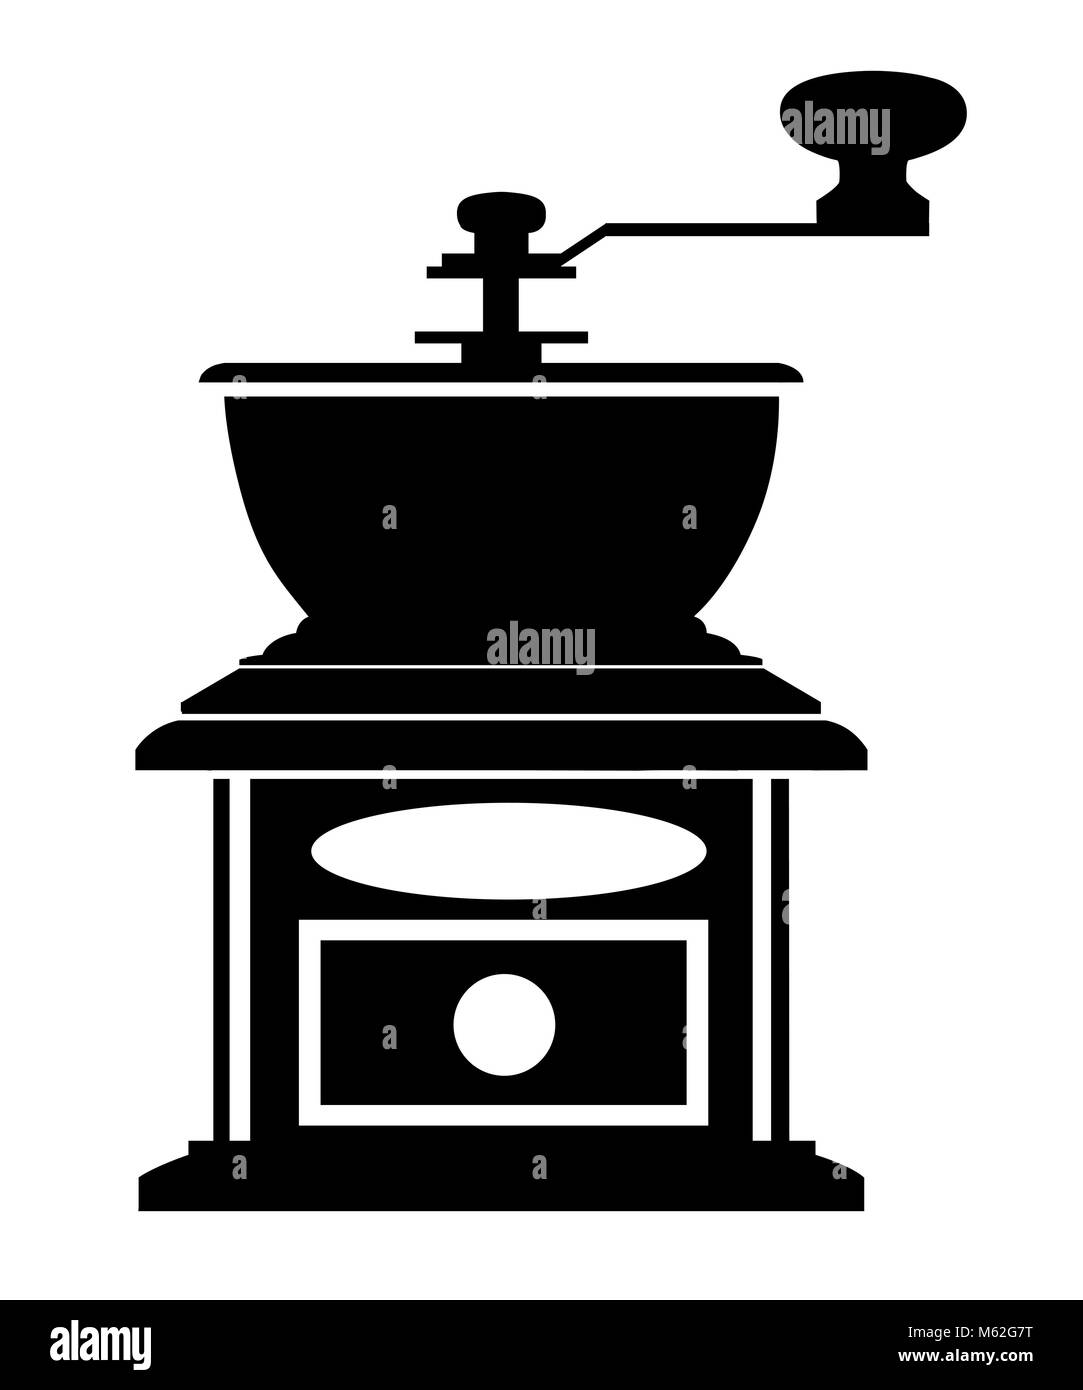 Black silhouette classic coffee grinder manual coffee mill vector illustration isolated on white background Stock Vector